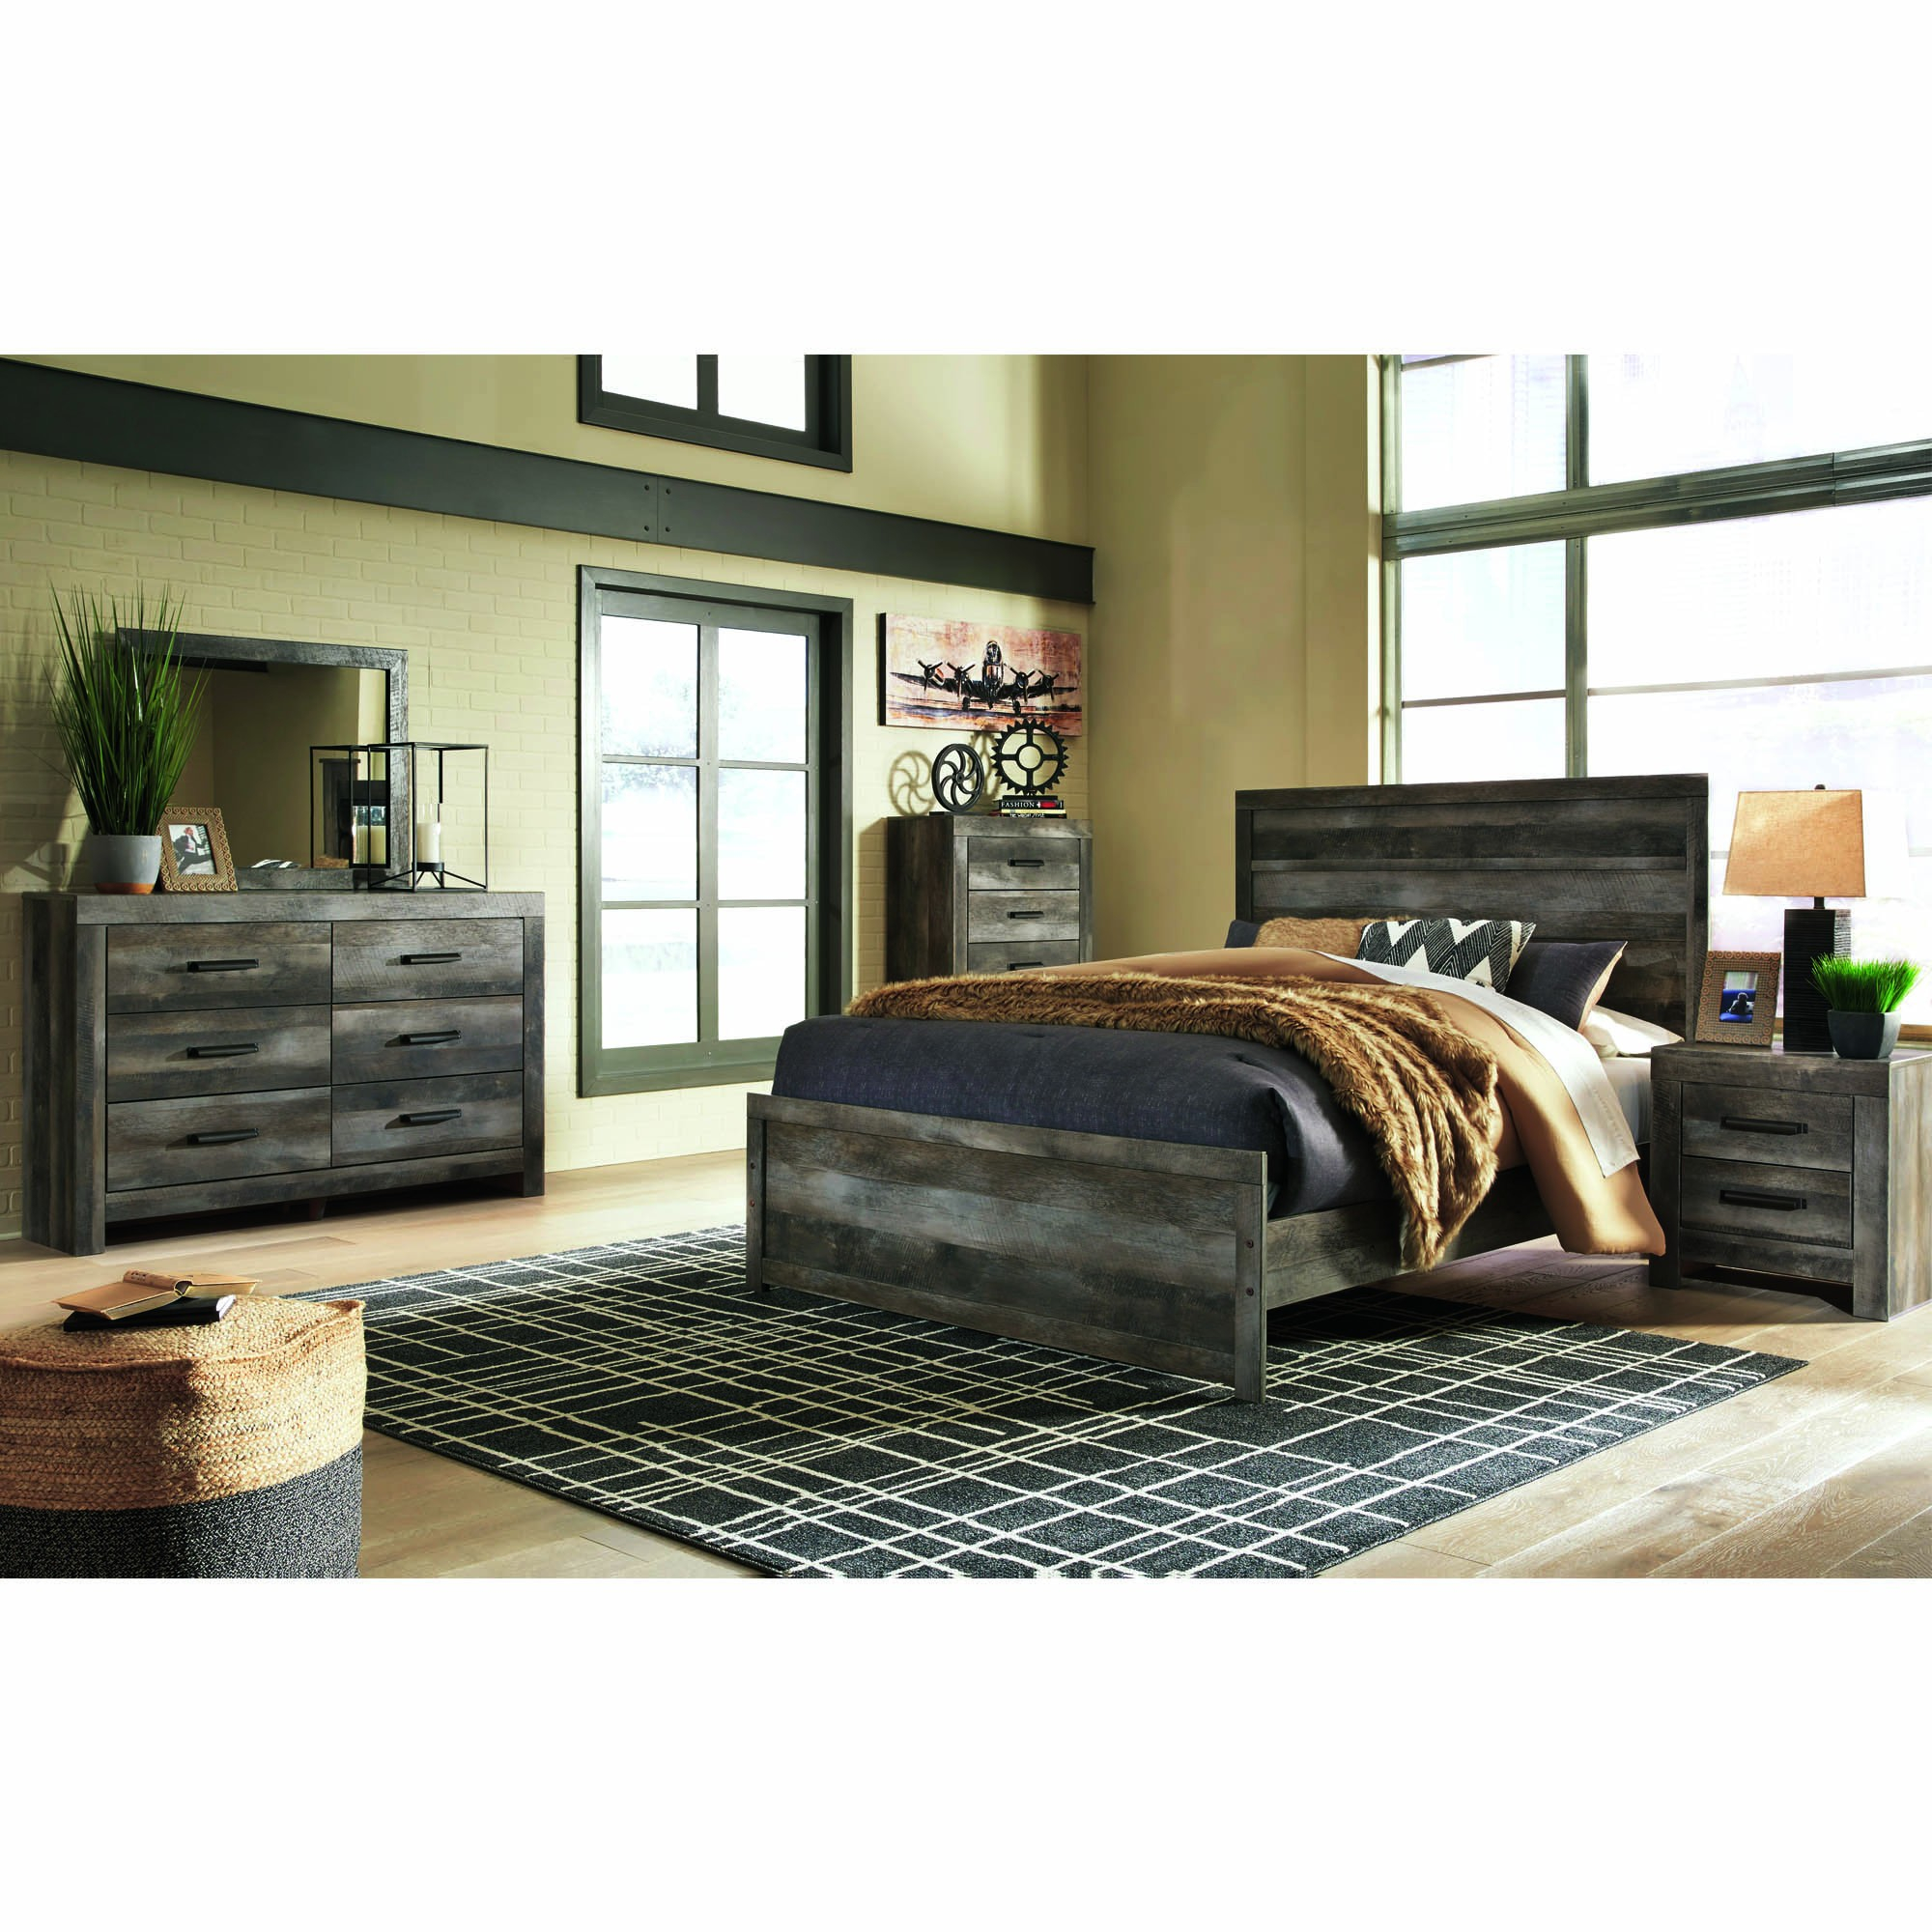 Wynnlow Rustic Gray Plank Queen 6pc Bedroom Set intended for dimensions 2000 X 2000